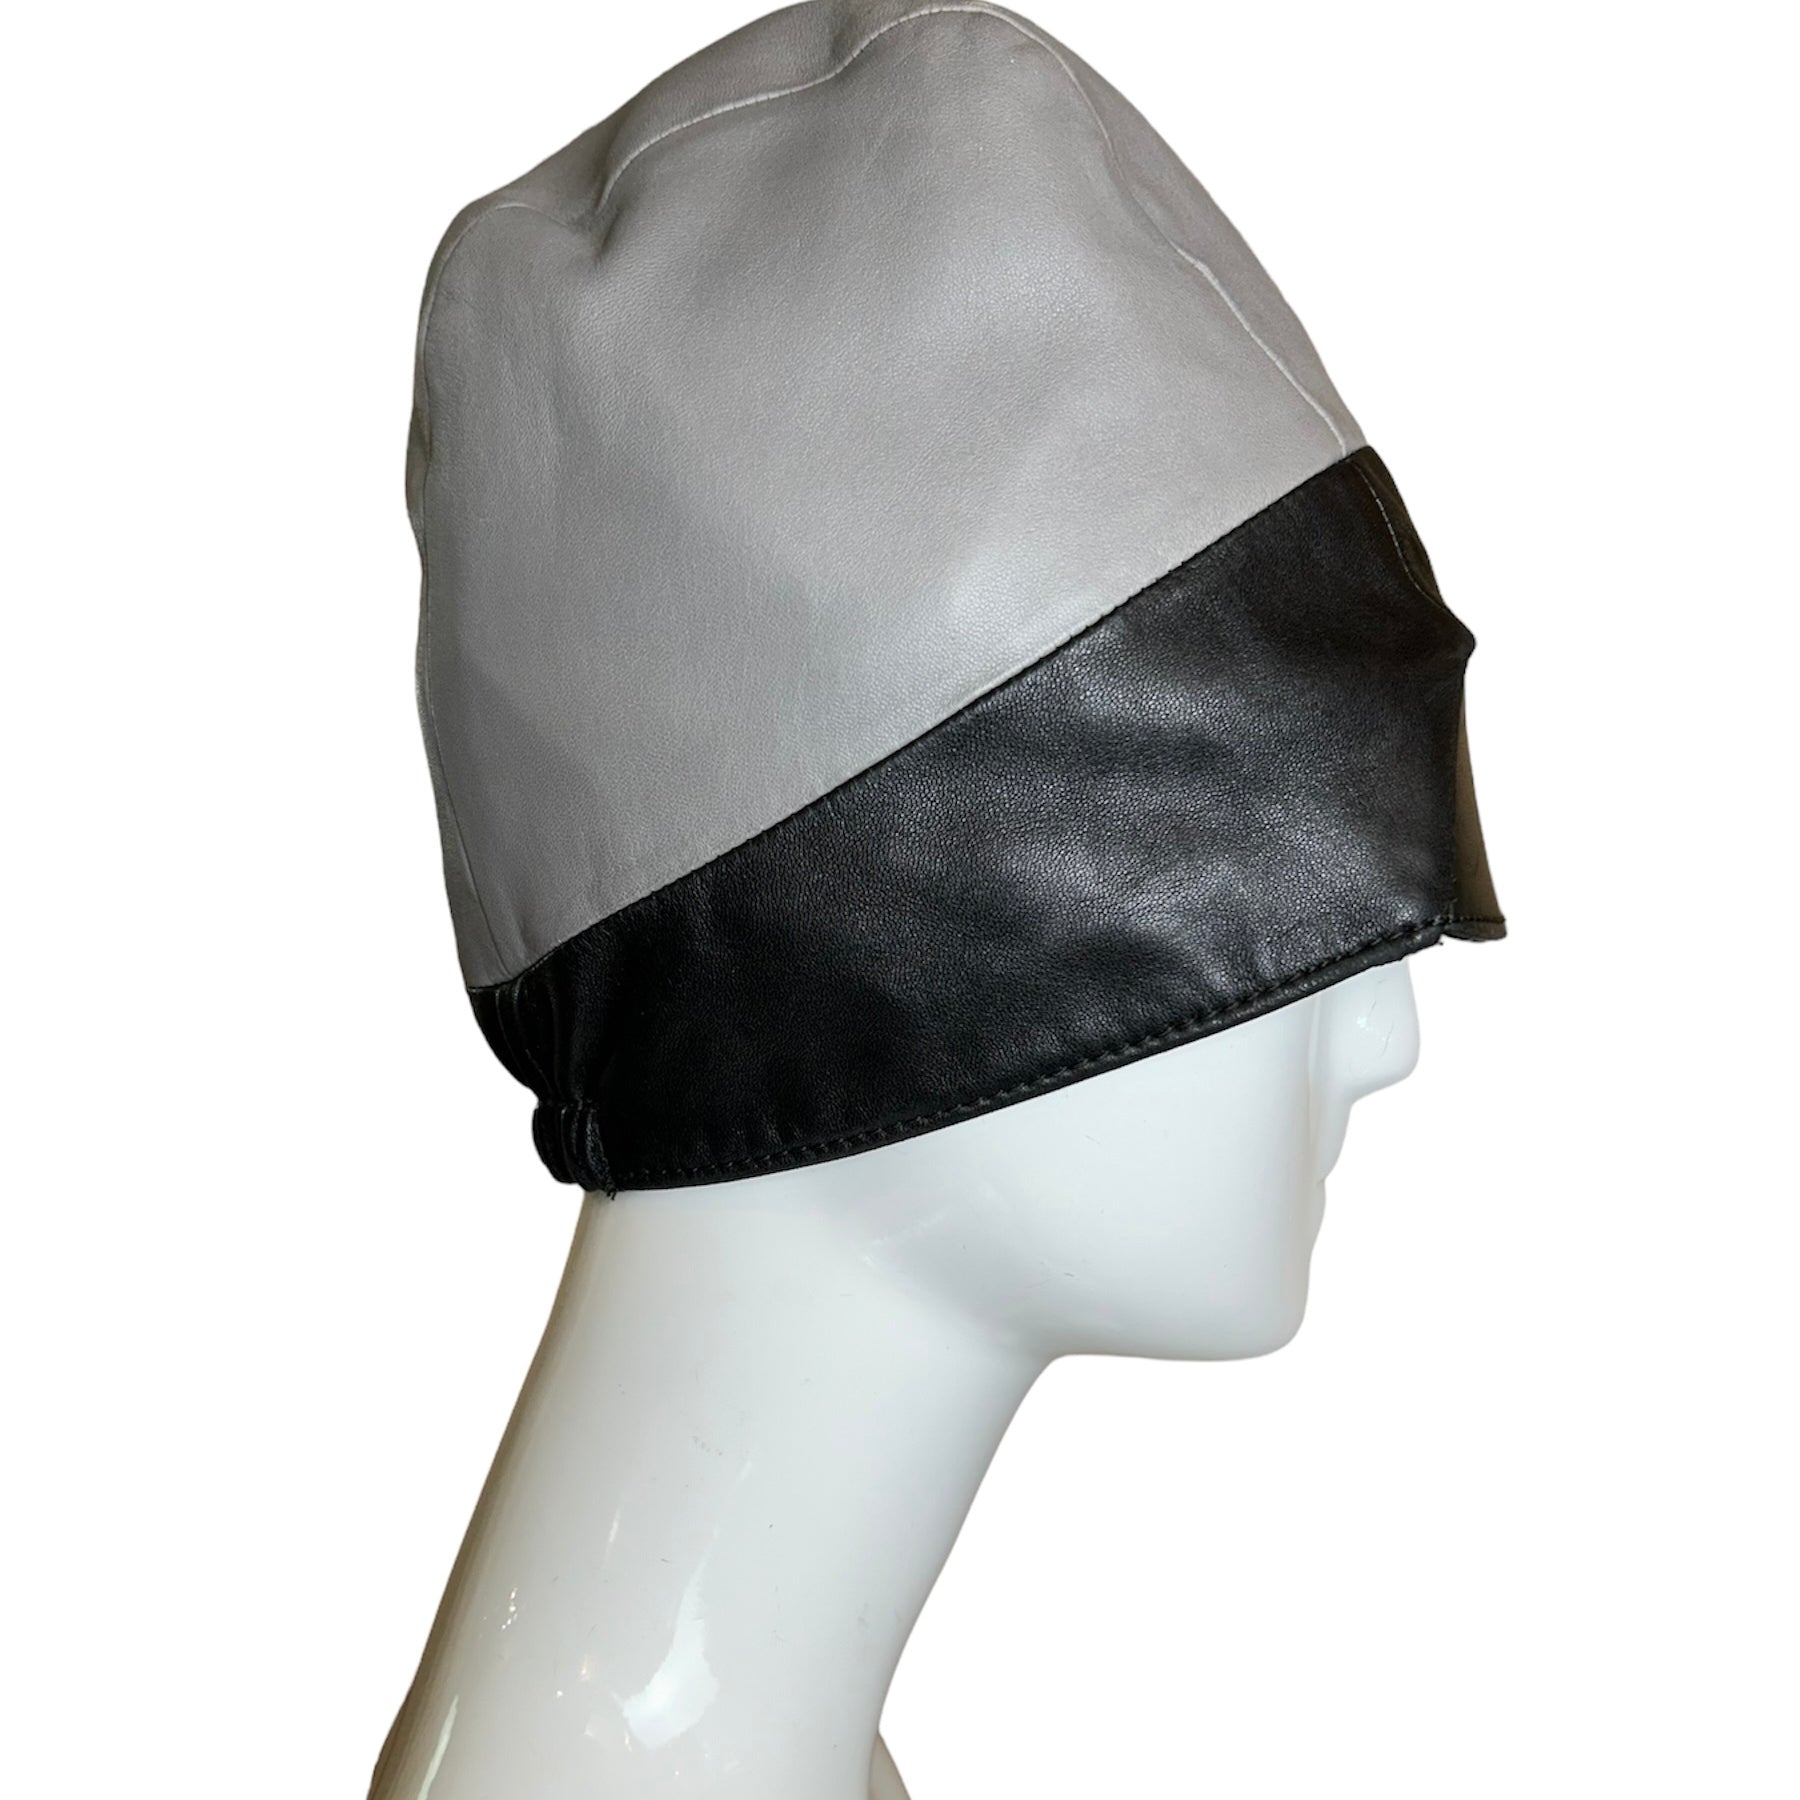 PRADA 60s Inspired Leather Cloche SIDE PHOTO 2 OF 4